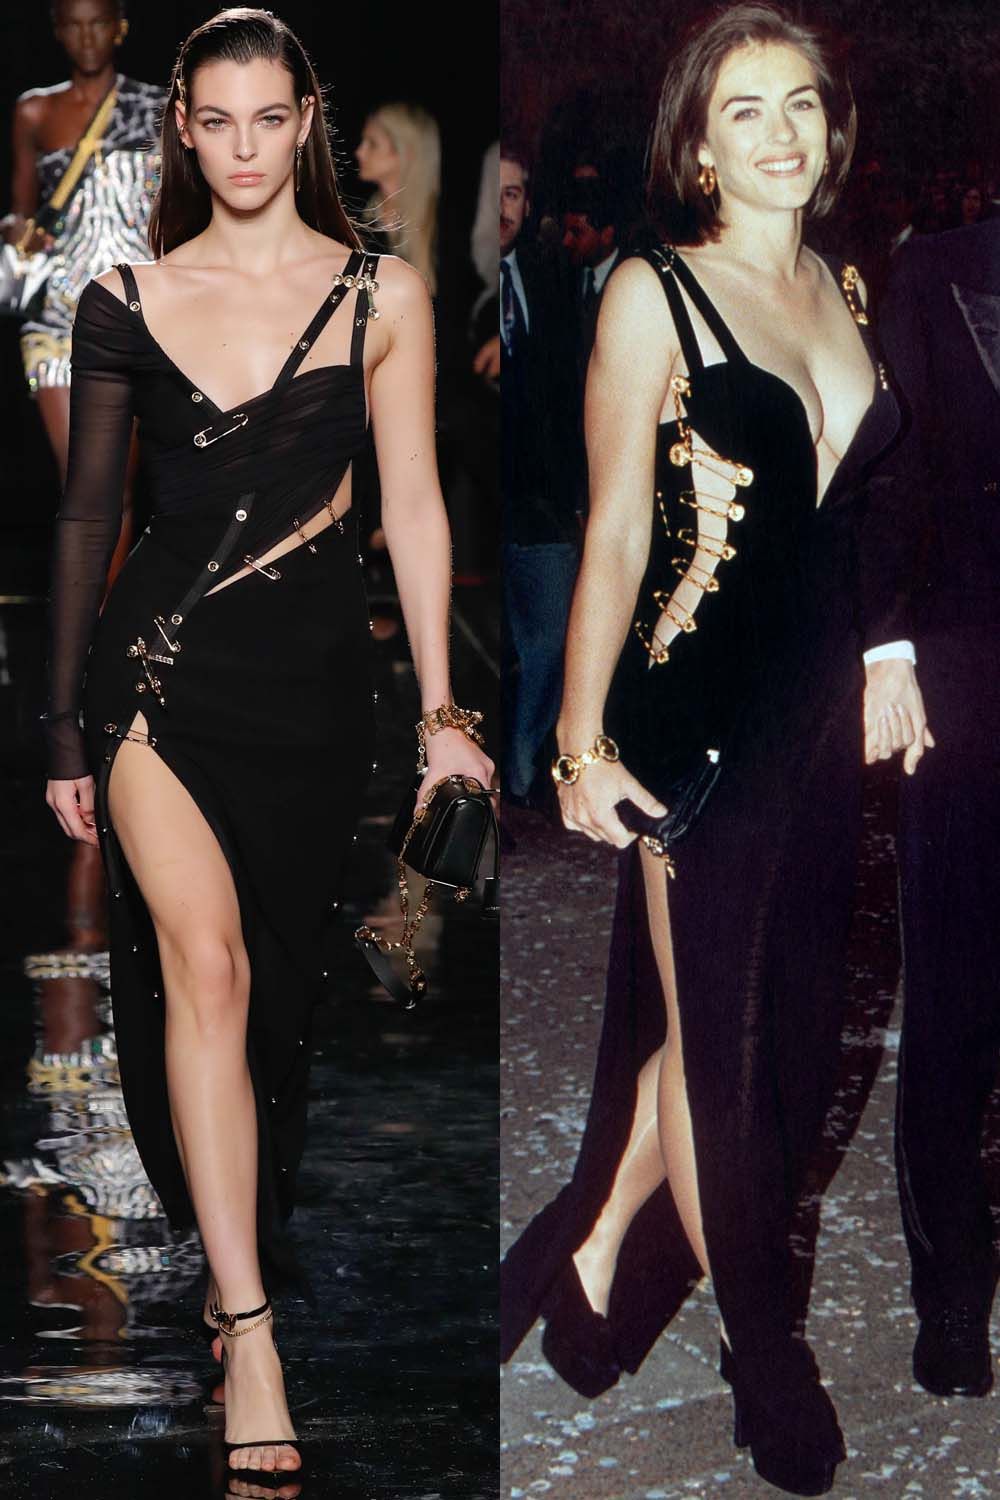 gianni versace most iconic dresses